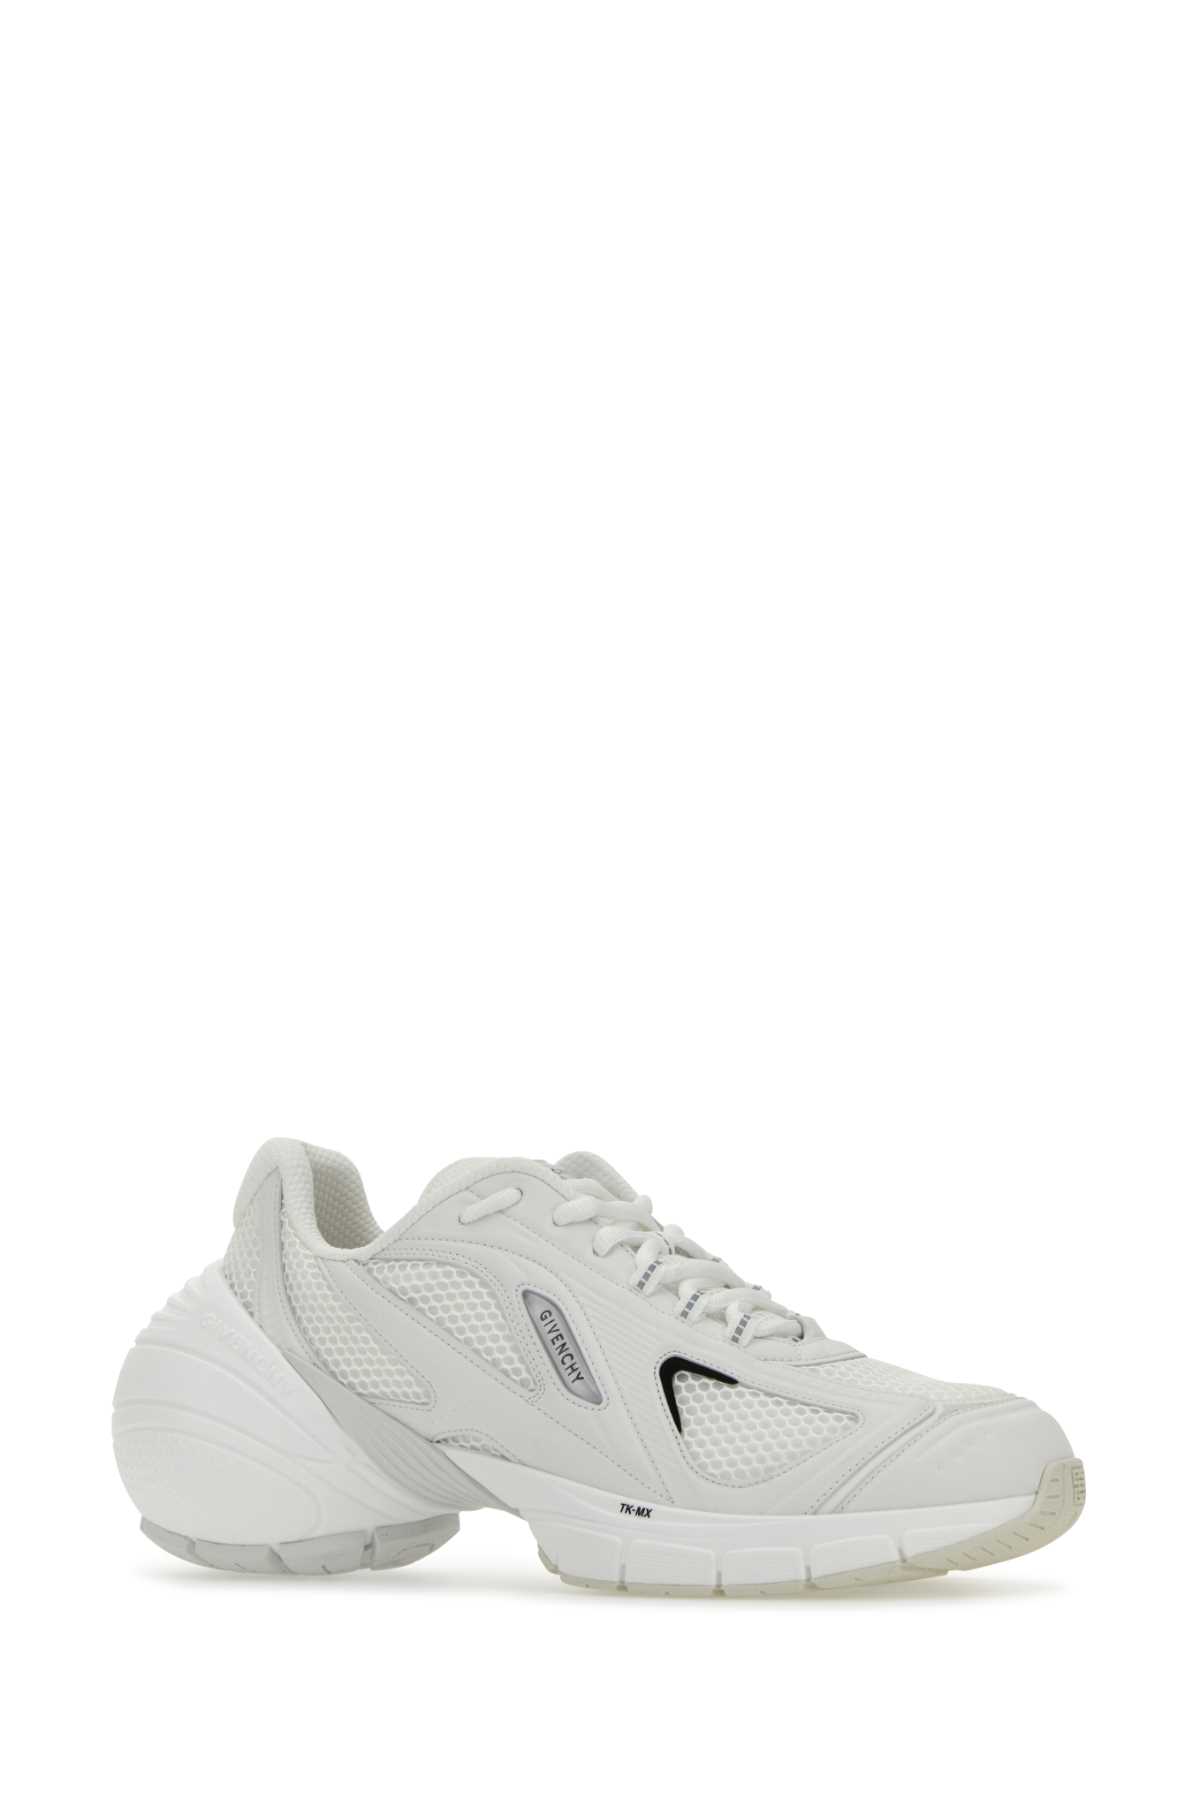 Givenchy White Mesh And Synthetic Leather Tk-mx Trainers